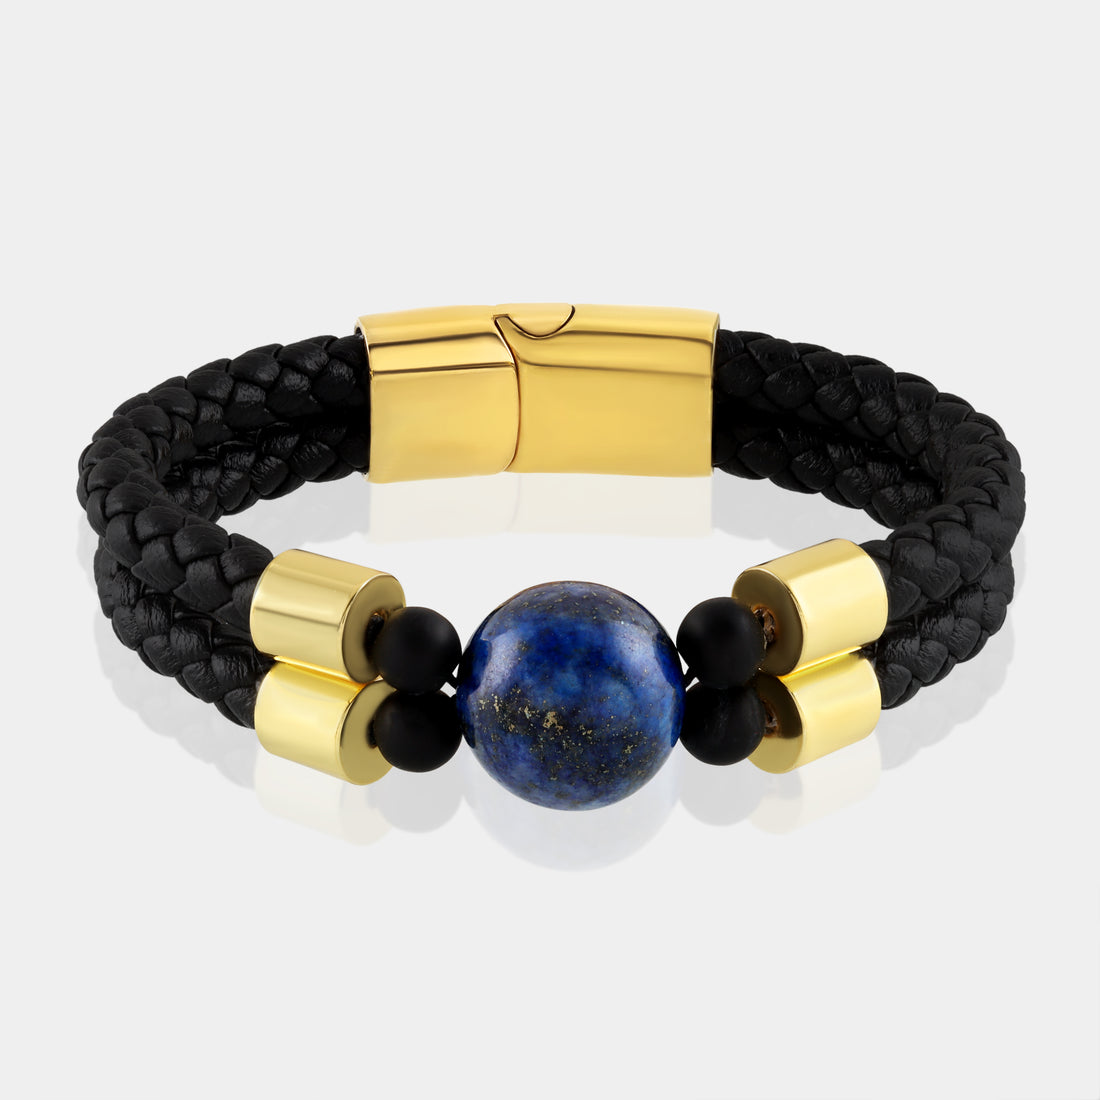 Lapis Lazuli Gold Bracelet with Double Layered Leather and Magnetic Lock